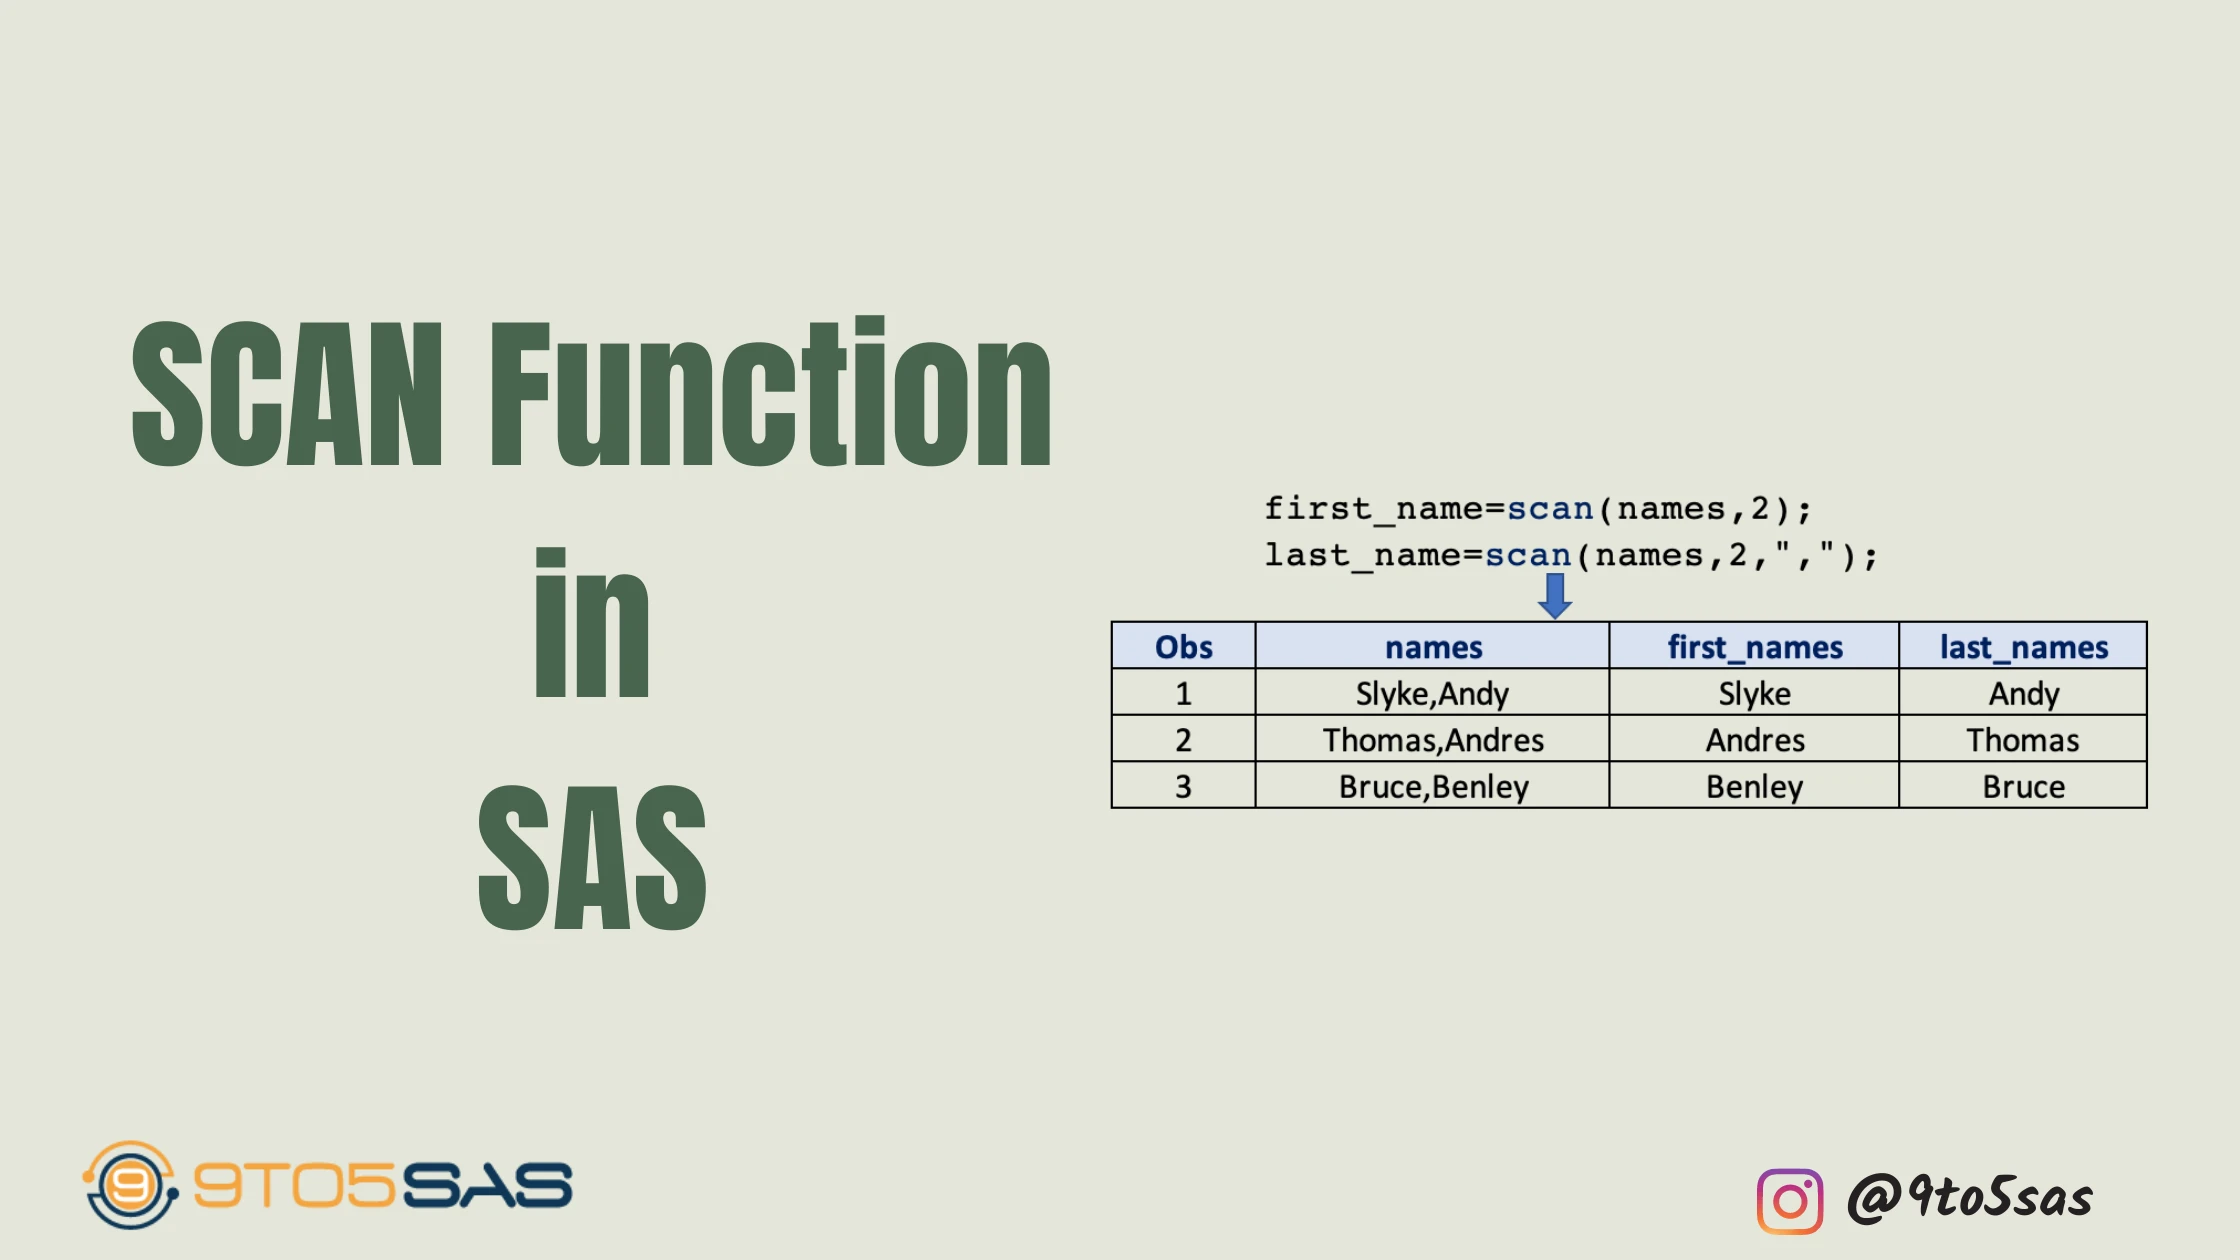 How to use the SAS SCAN Function?